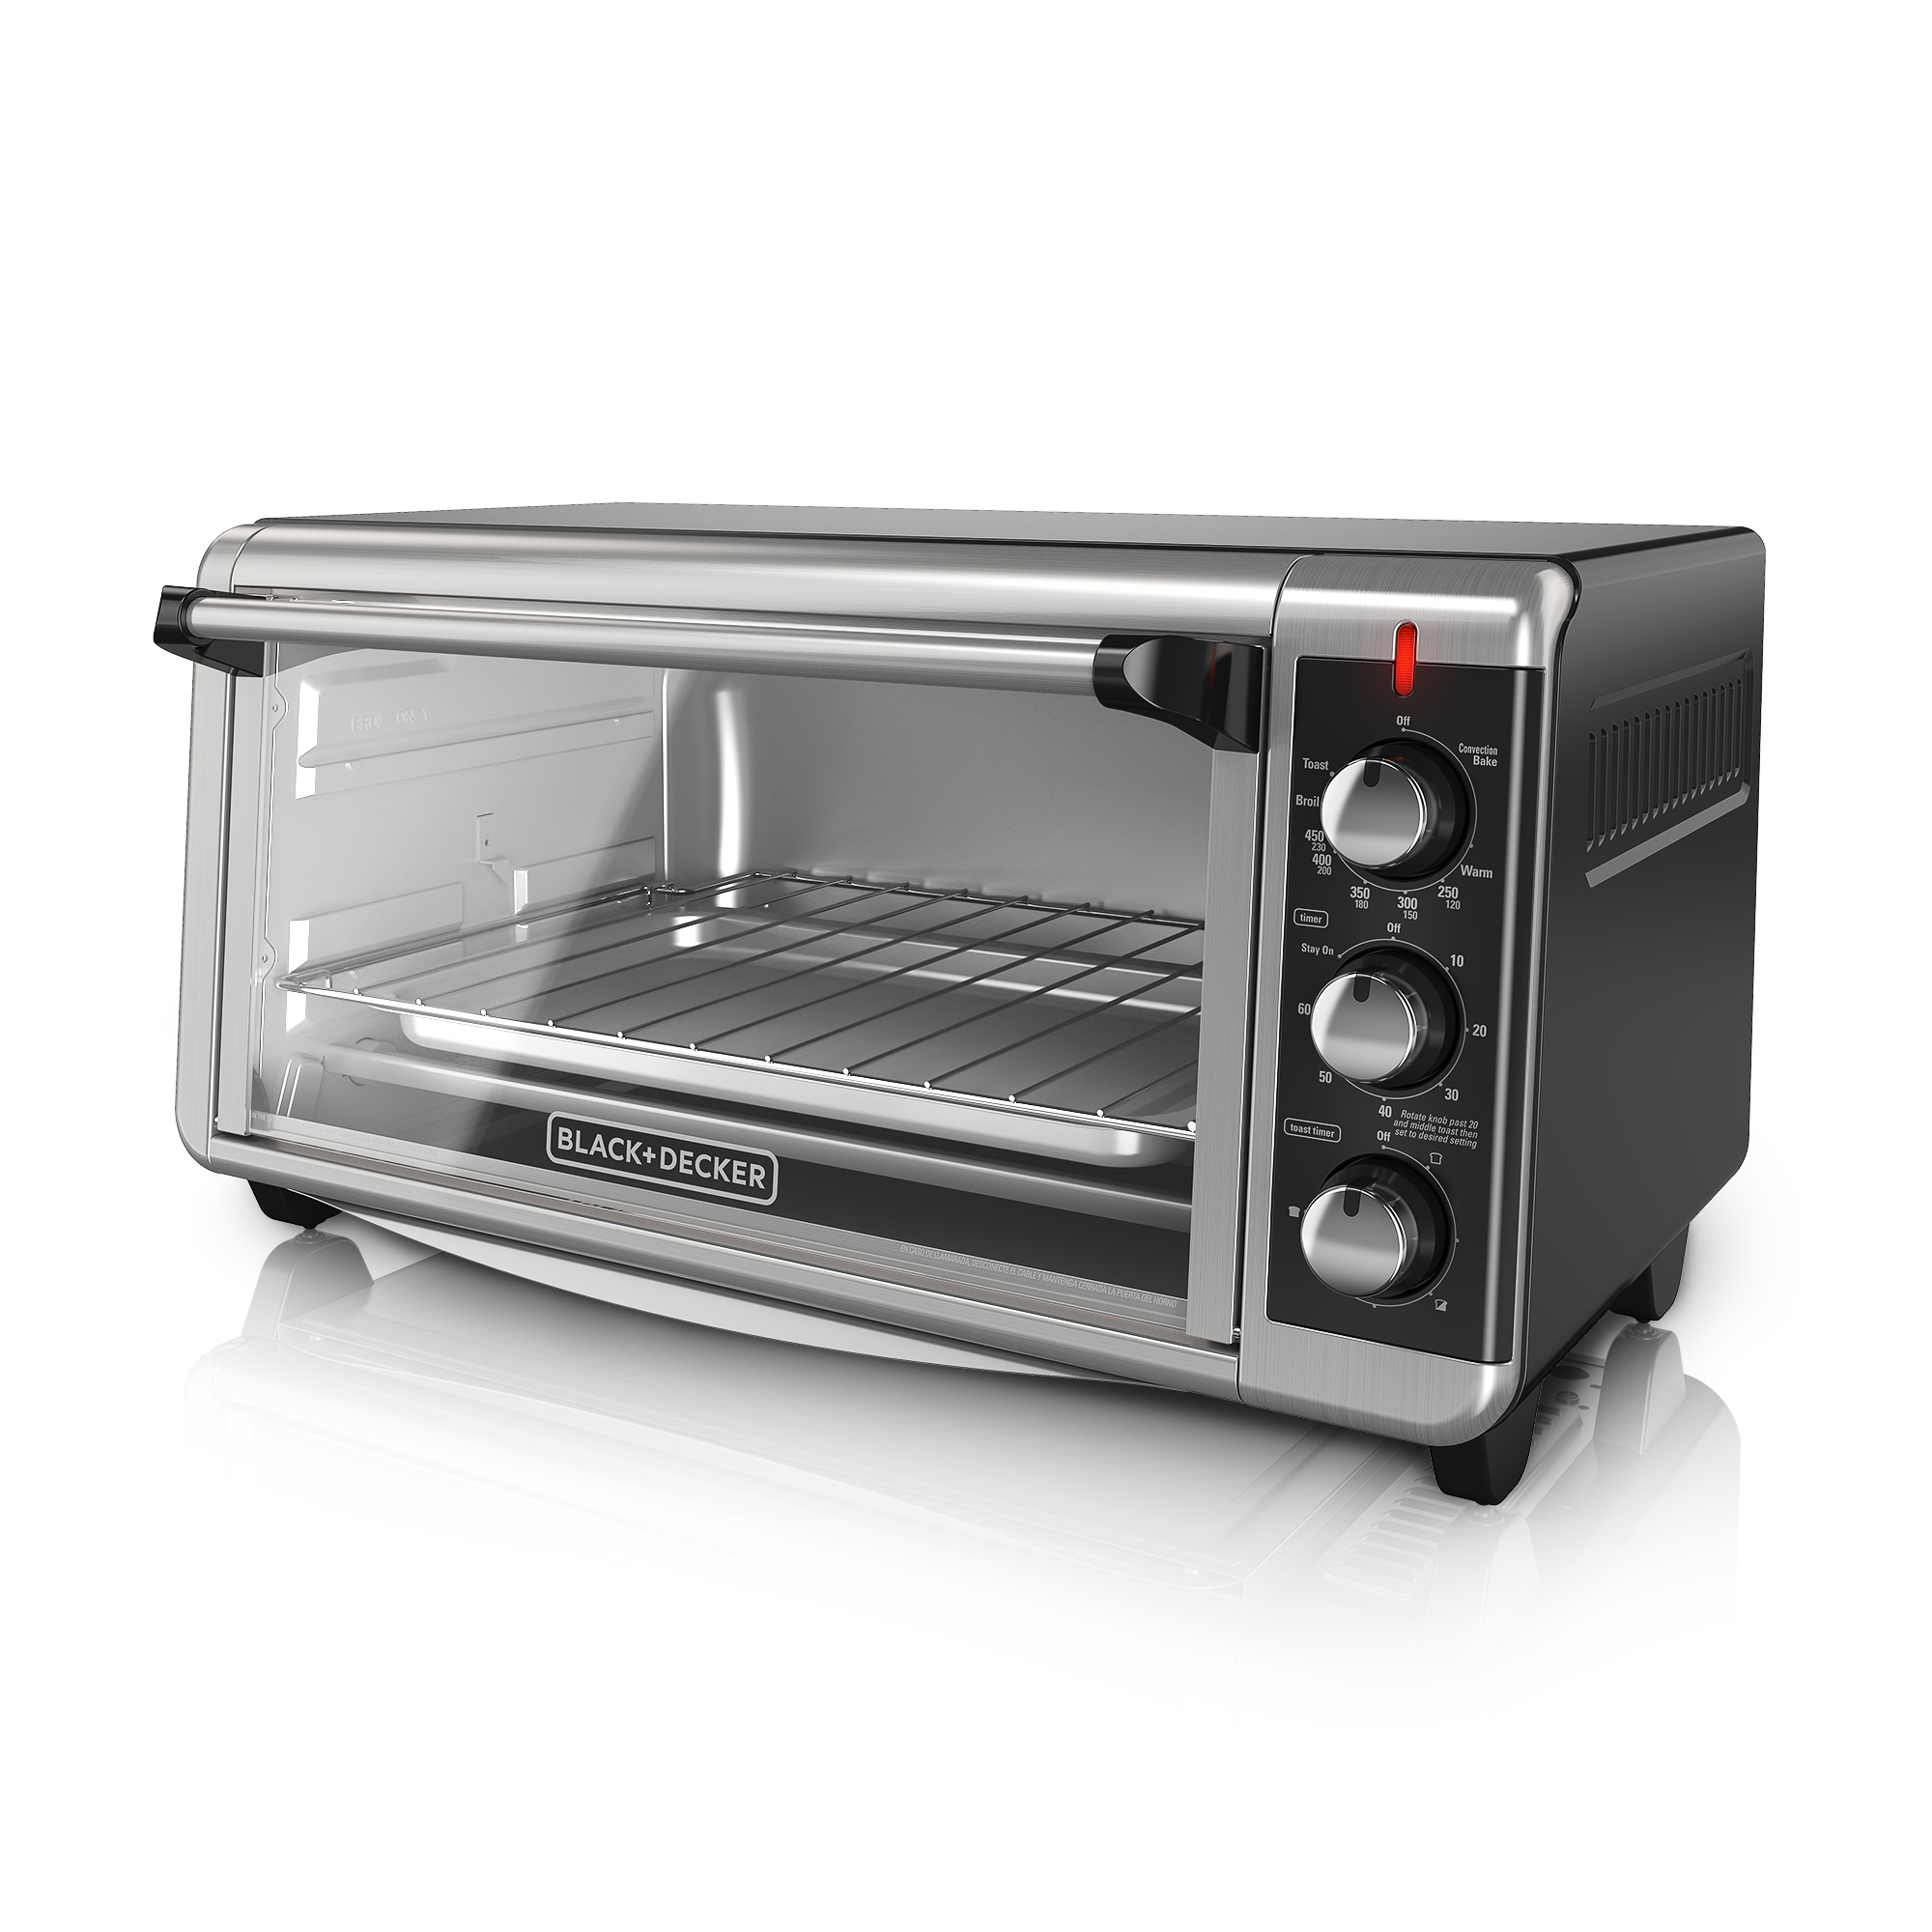 BLACK+DECKER 8-Slice Extra-Wide Stainless Steel/Black Convection Countertop Toaster Oven, Stainless Steel, TO3250XSB - image 1 of 14